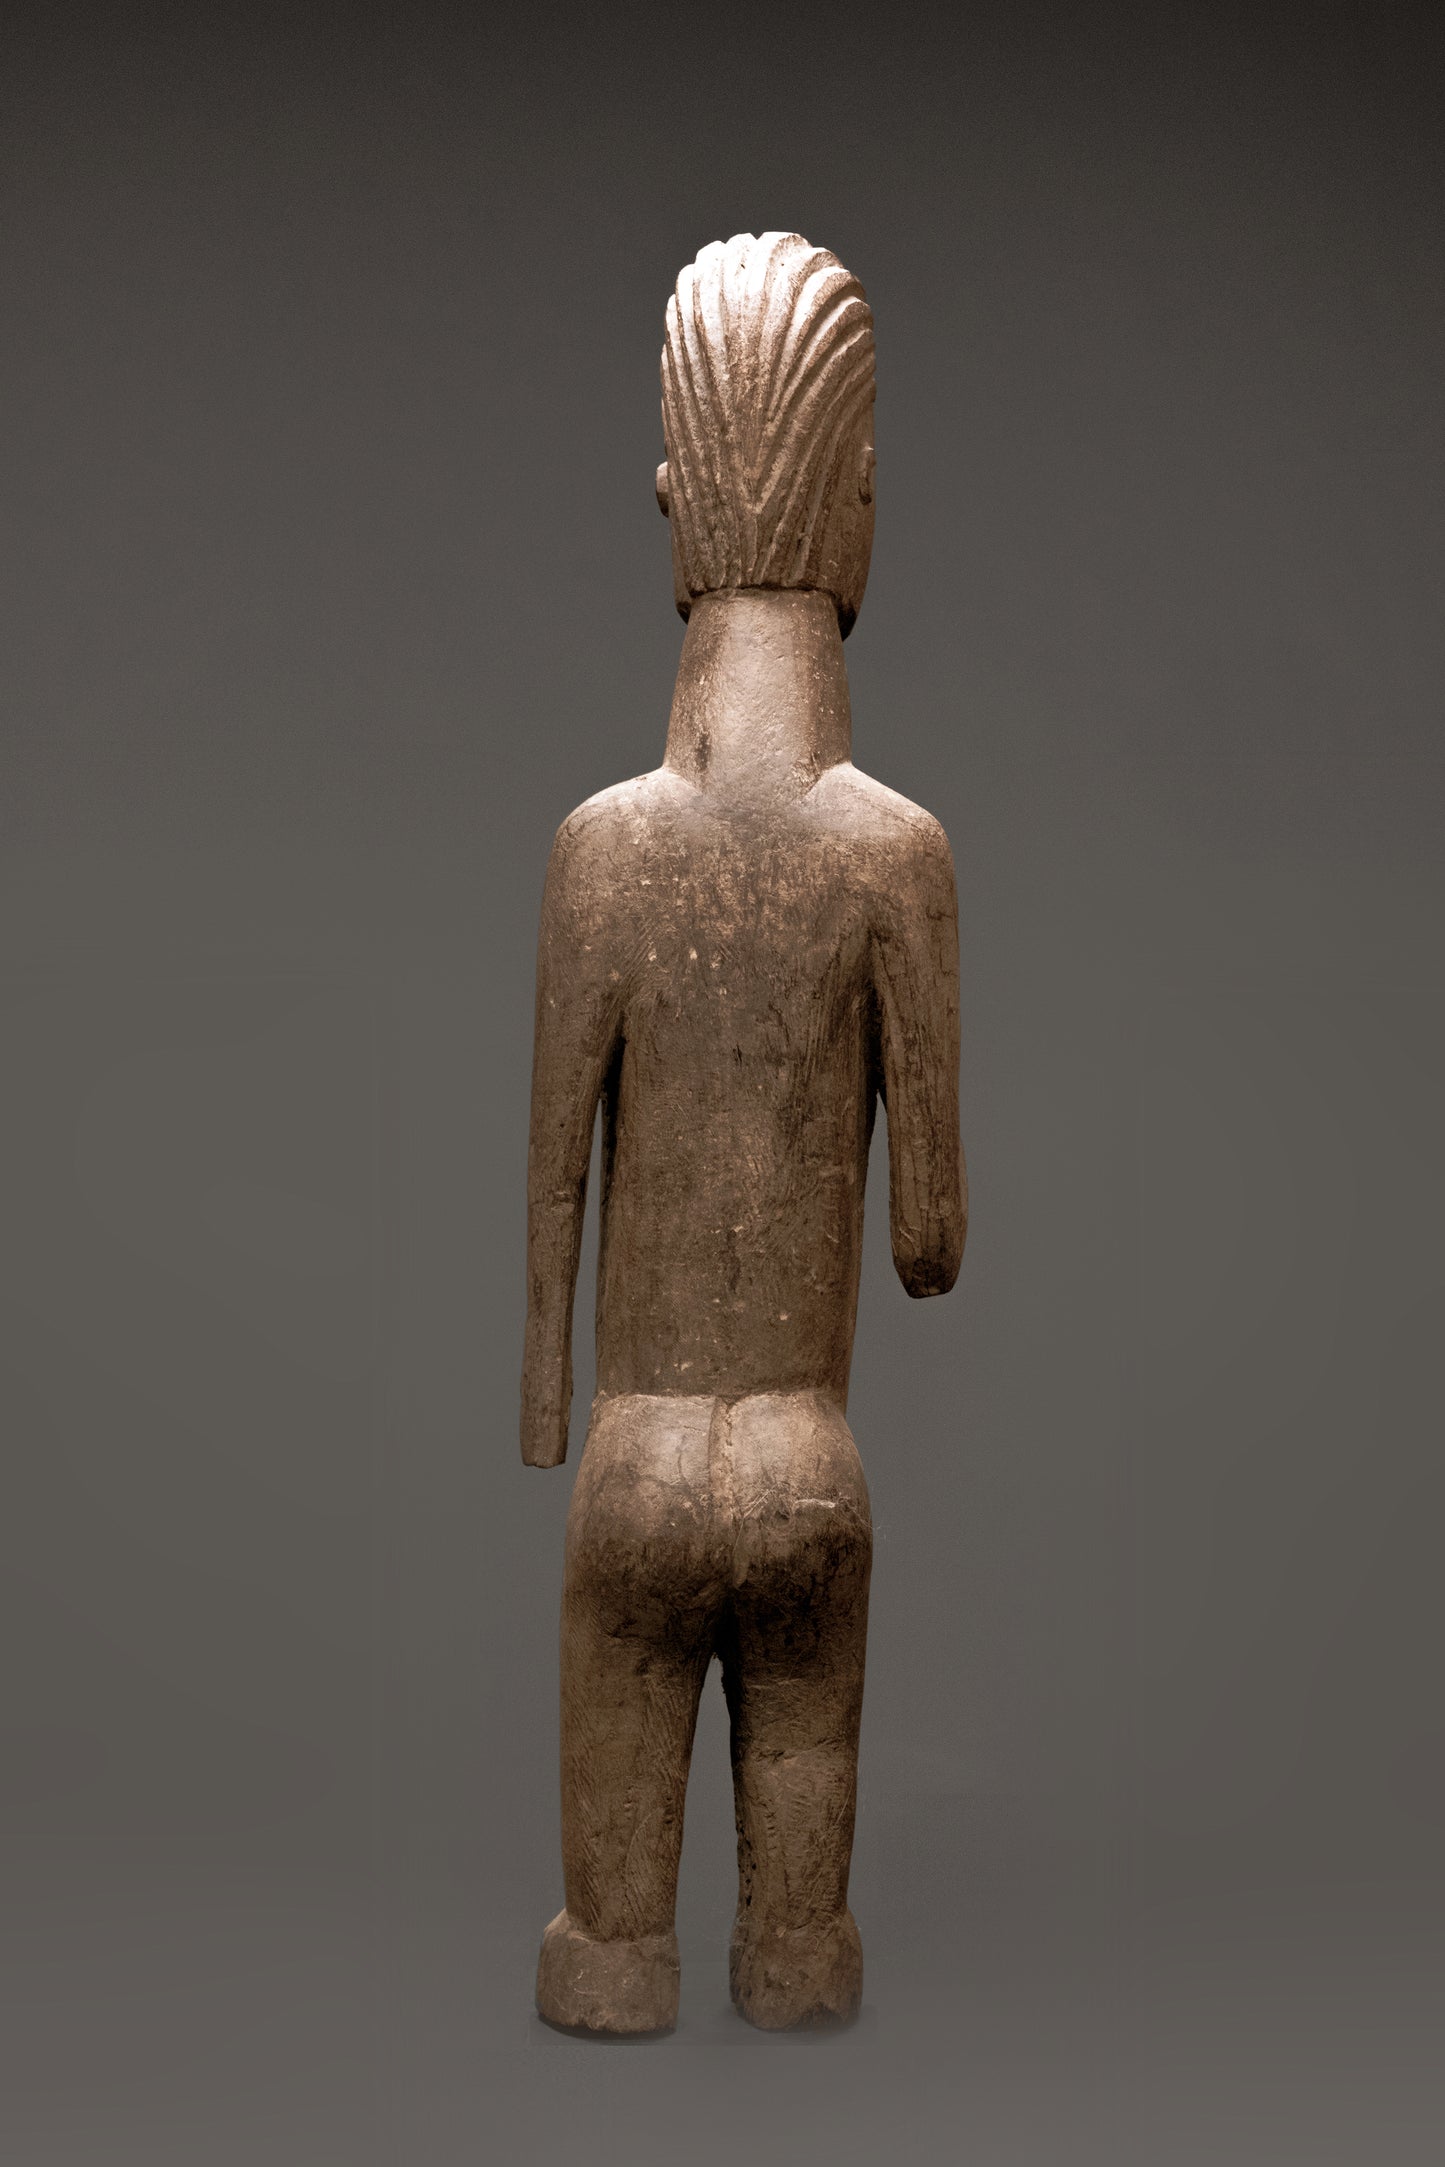 An early sculpture of Dihunthe Palenfo